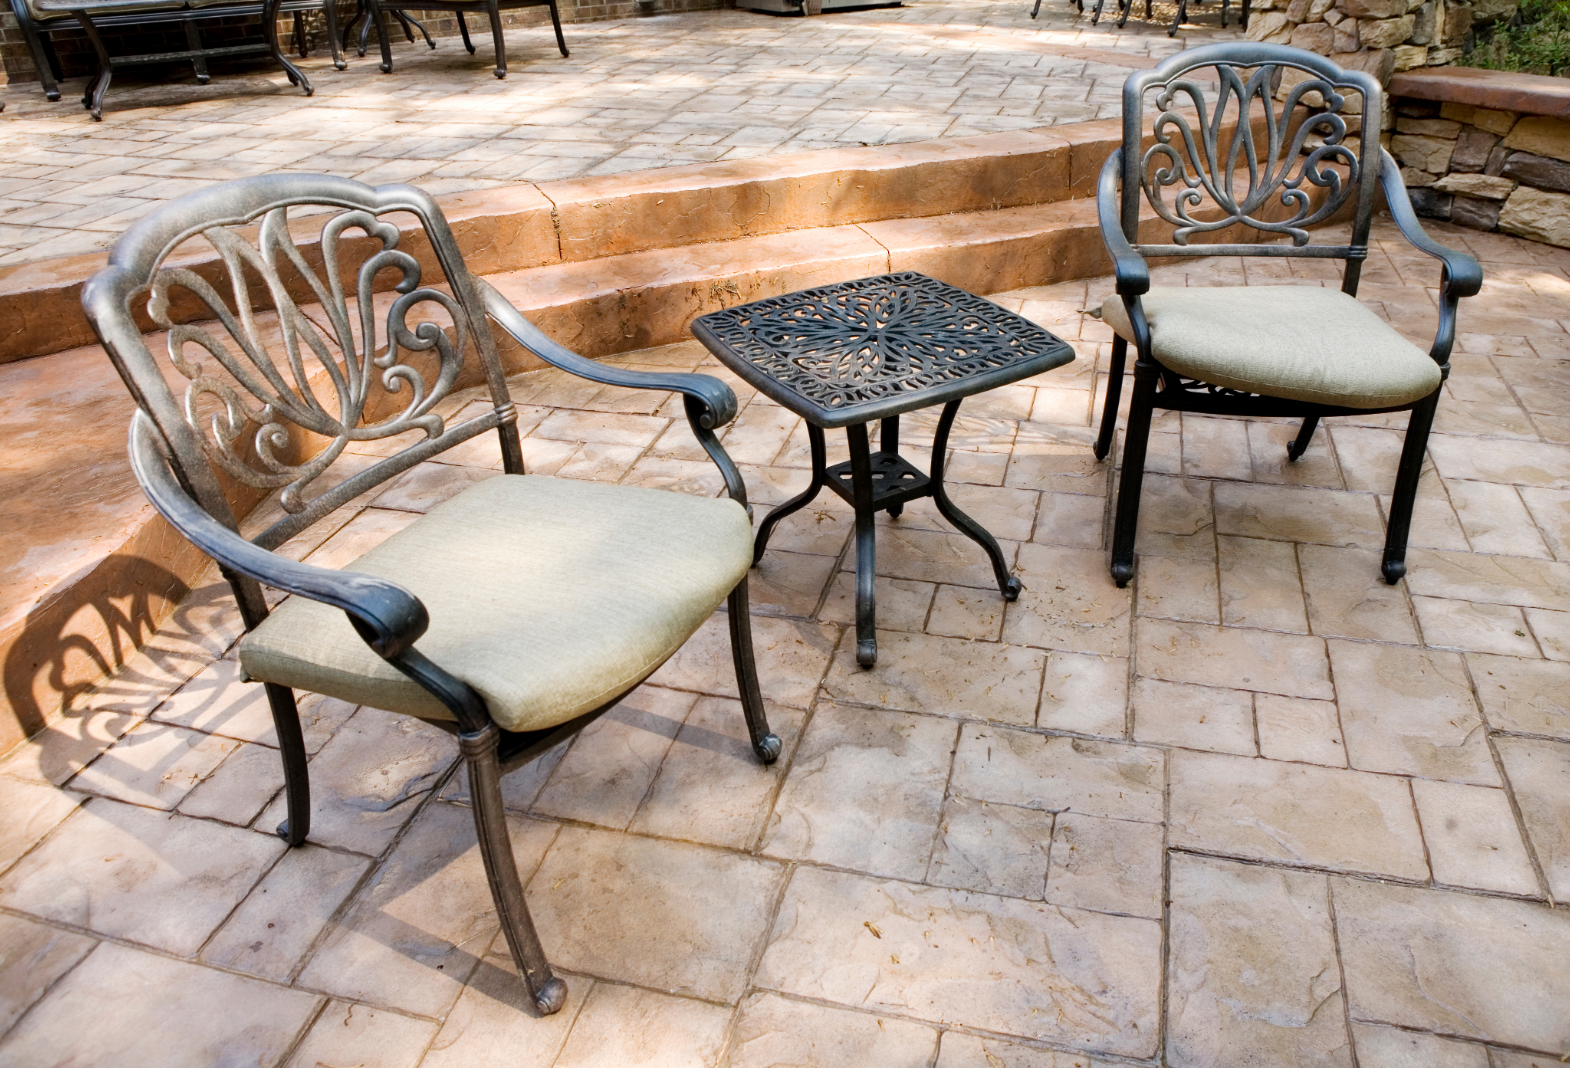 This is a picture of a stamped concrete patio.  The concrete has also been coloured to make it look even more attractive.